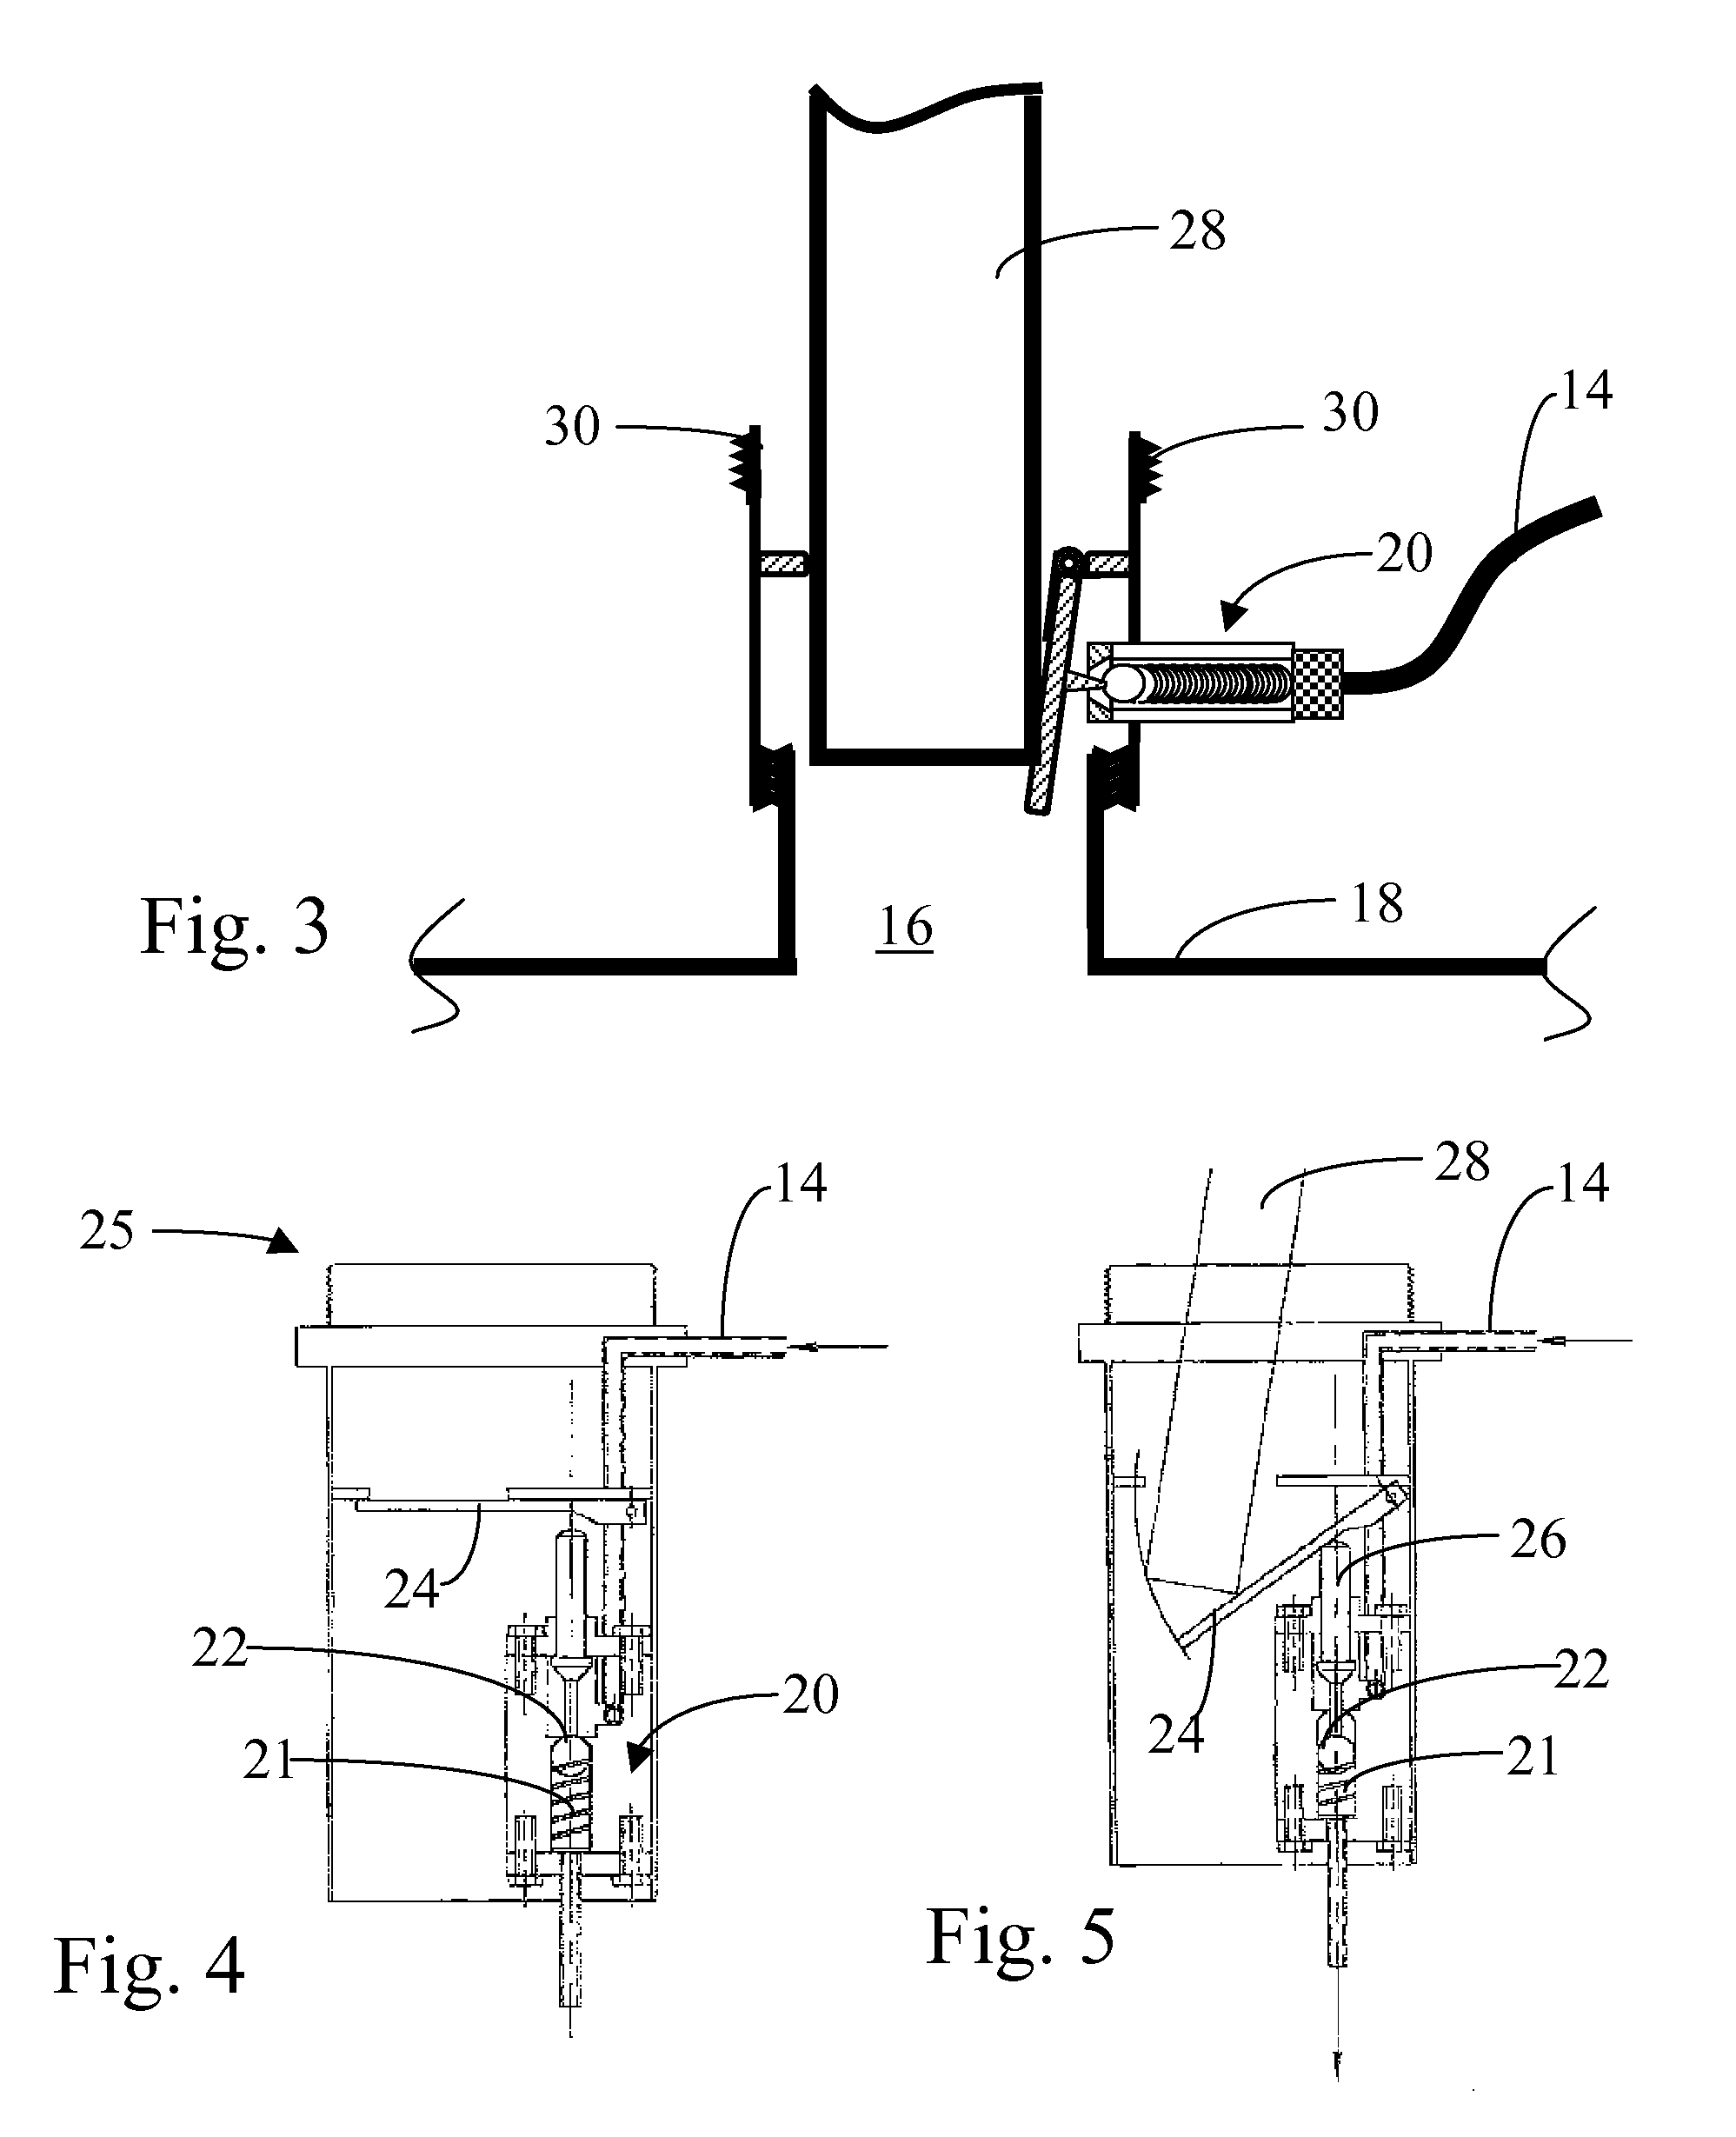 Gravity feed ball-in-seat valve with extension unit for dosing fuel additives